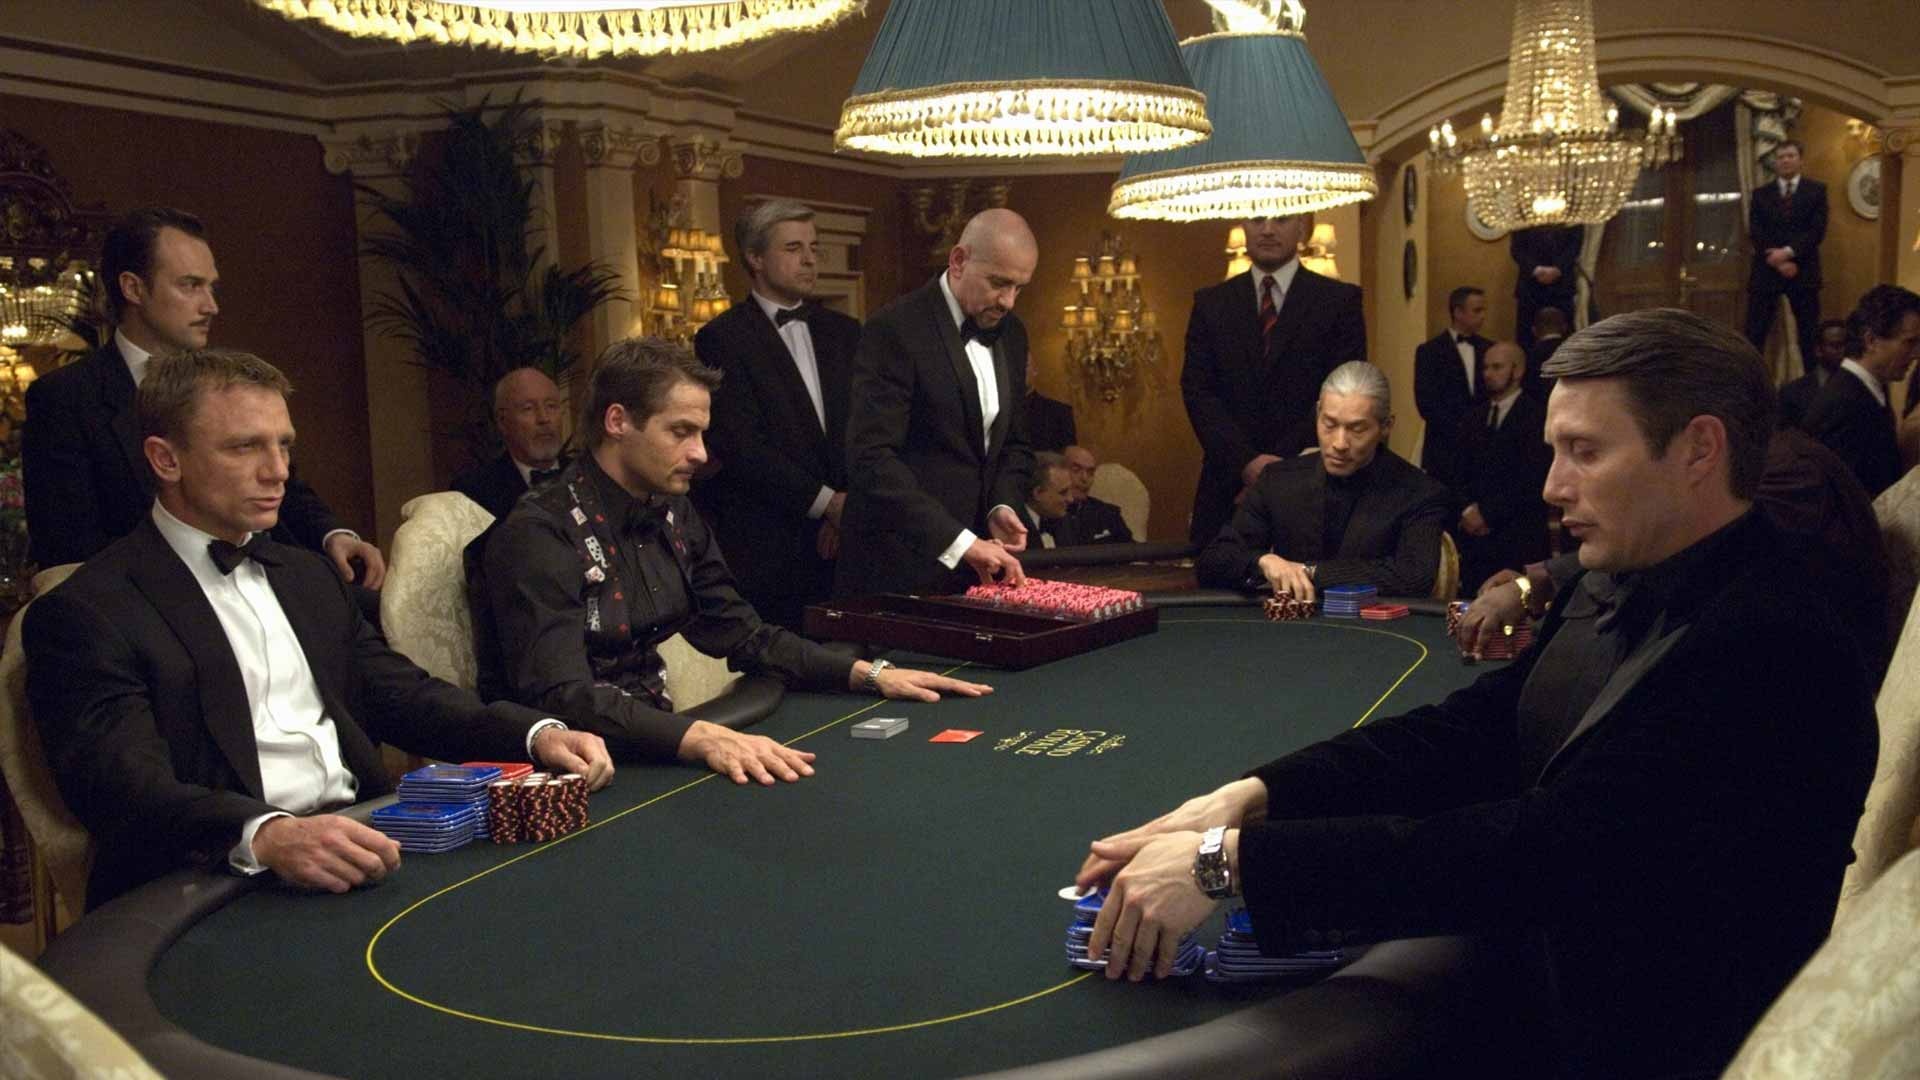 Casino Royale: The sequel, Quantum of Solace, was released in 2008. 1920x1080 Full HD Background.